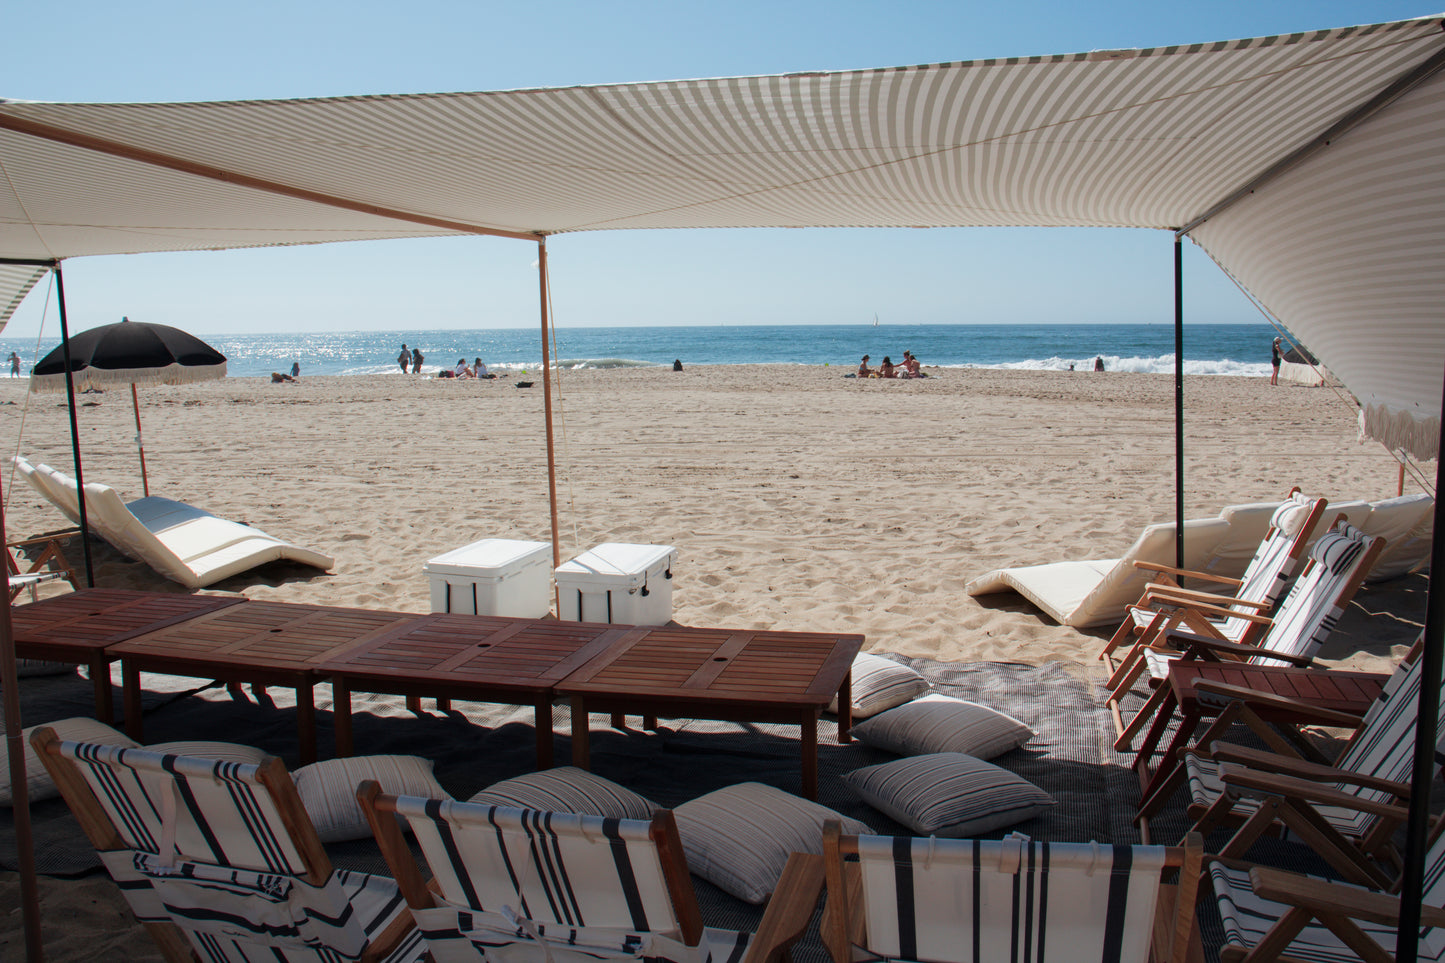 Beach lounge event rental for corporate beach event in Los Angeles